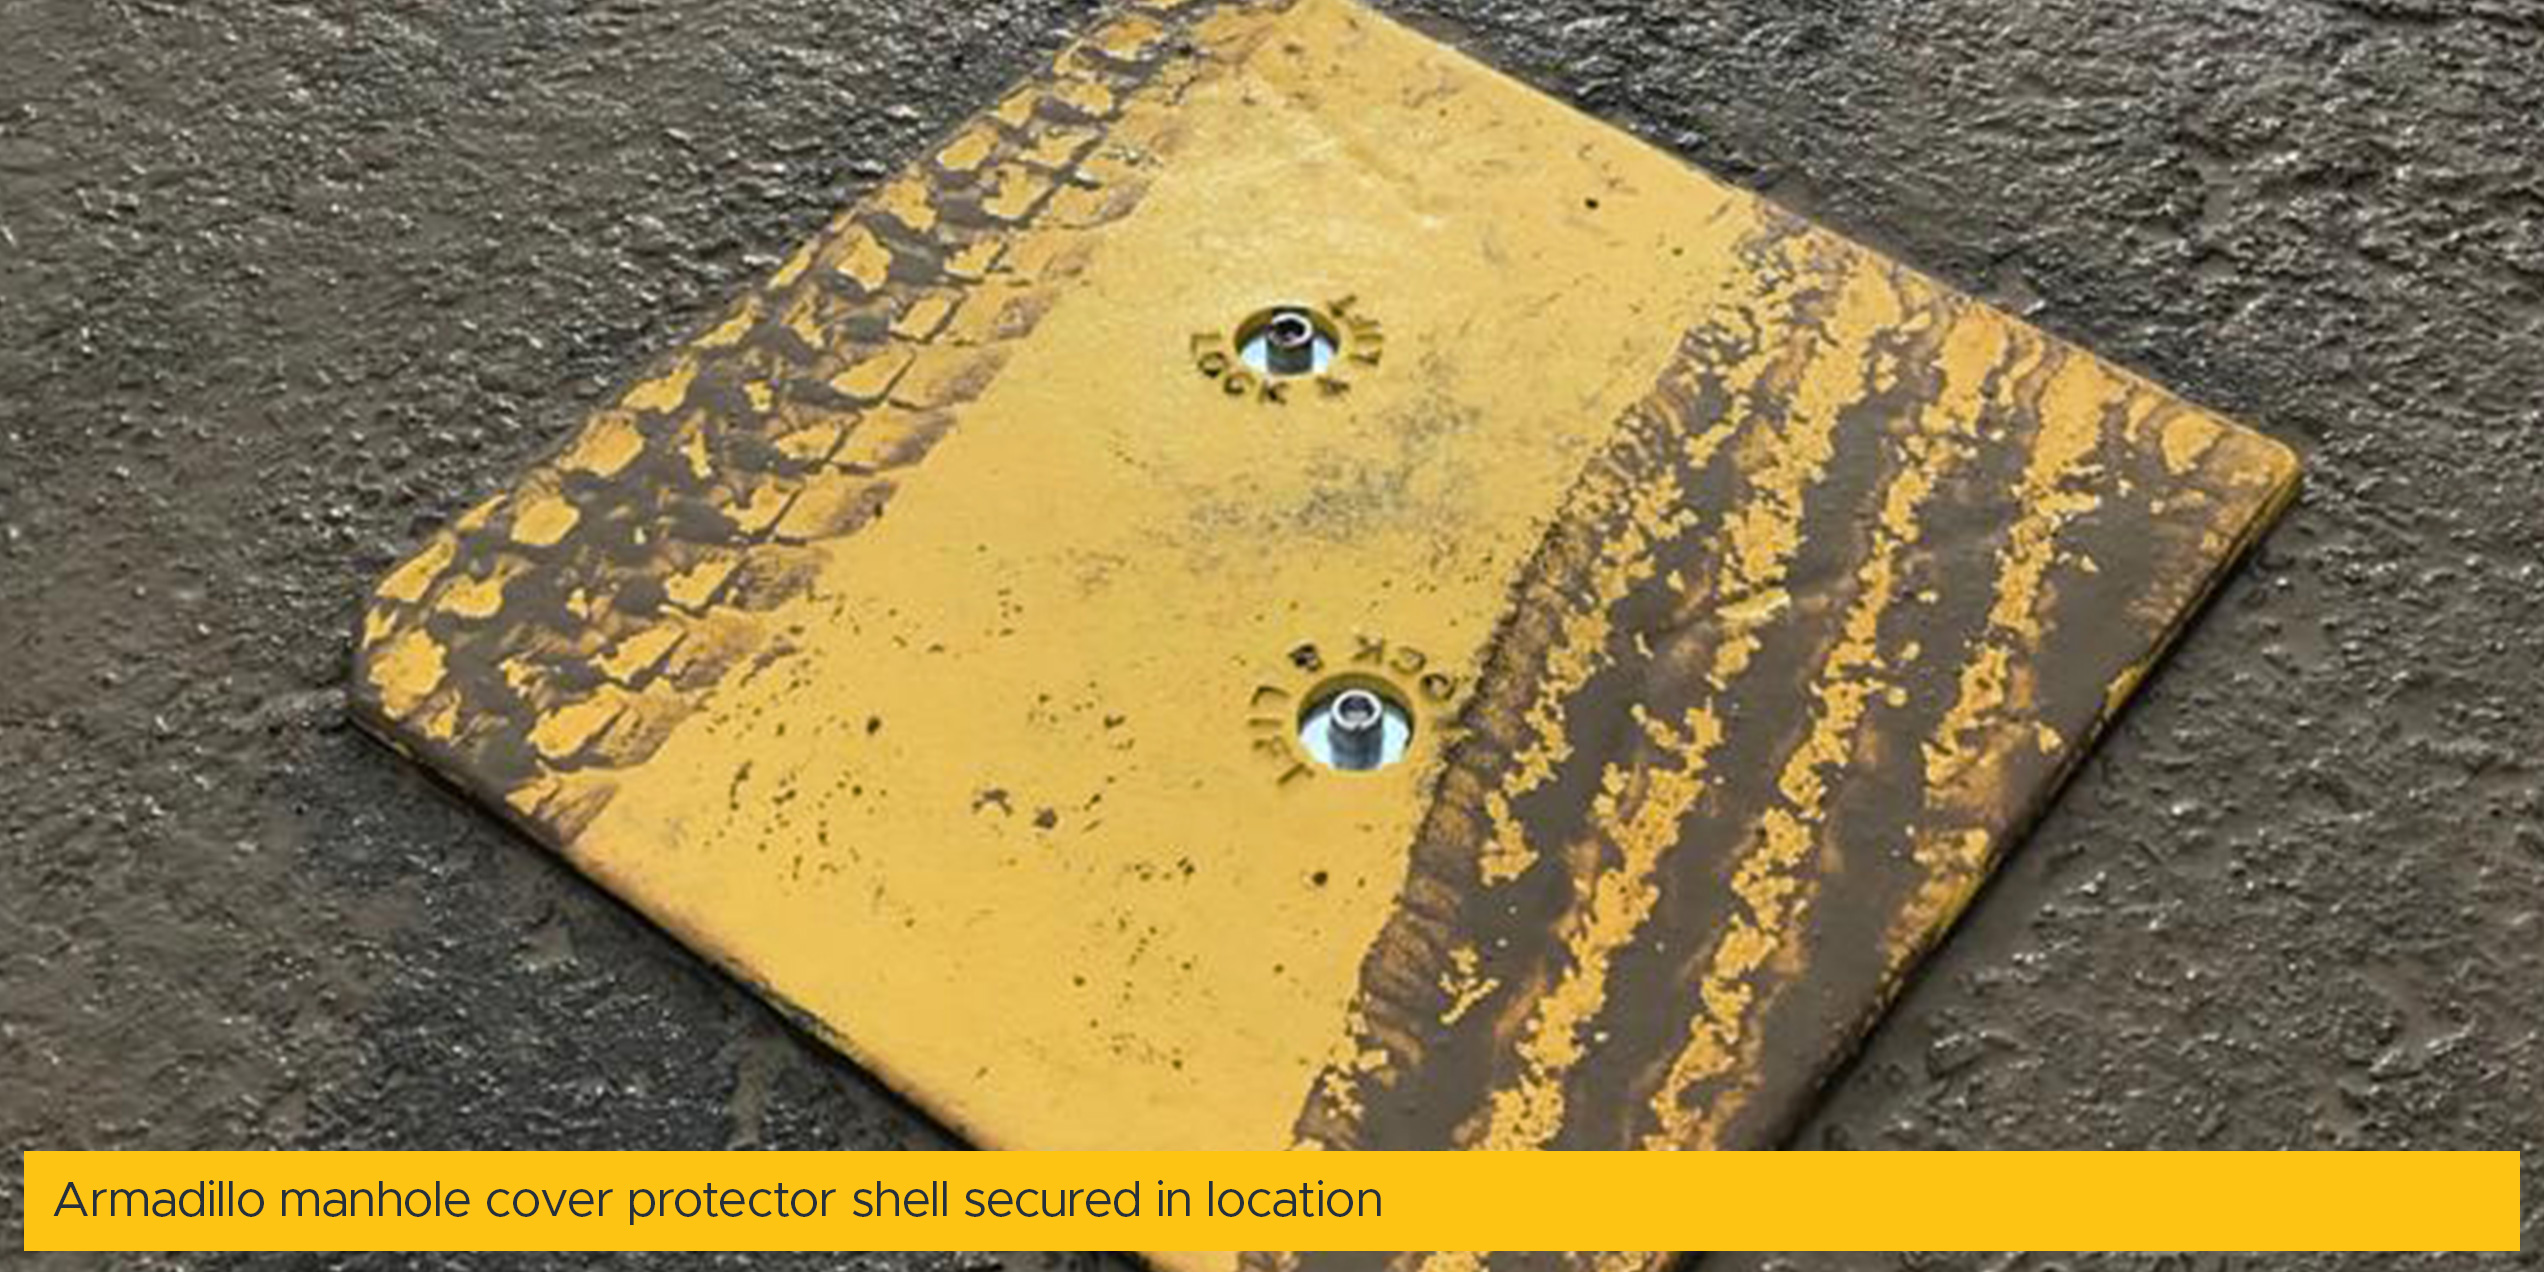 Armadillo manhole cover protector shell secured in location